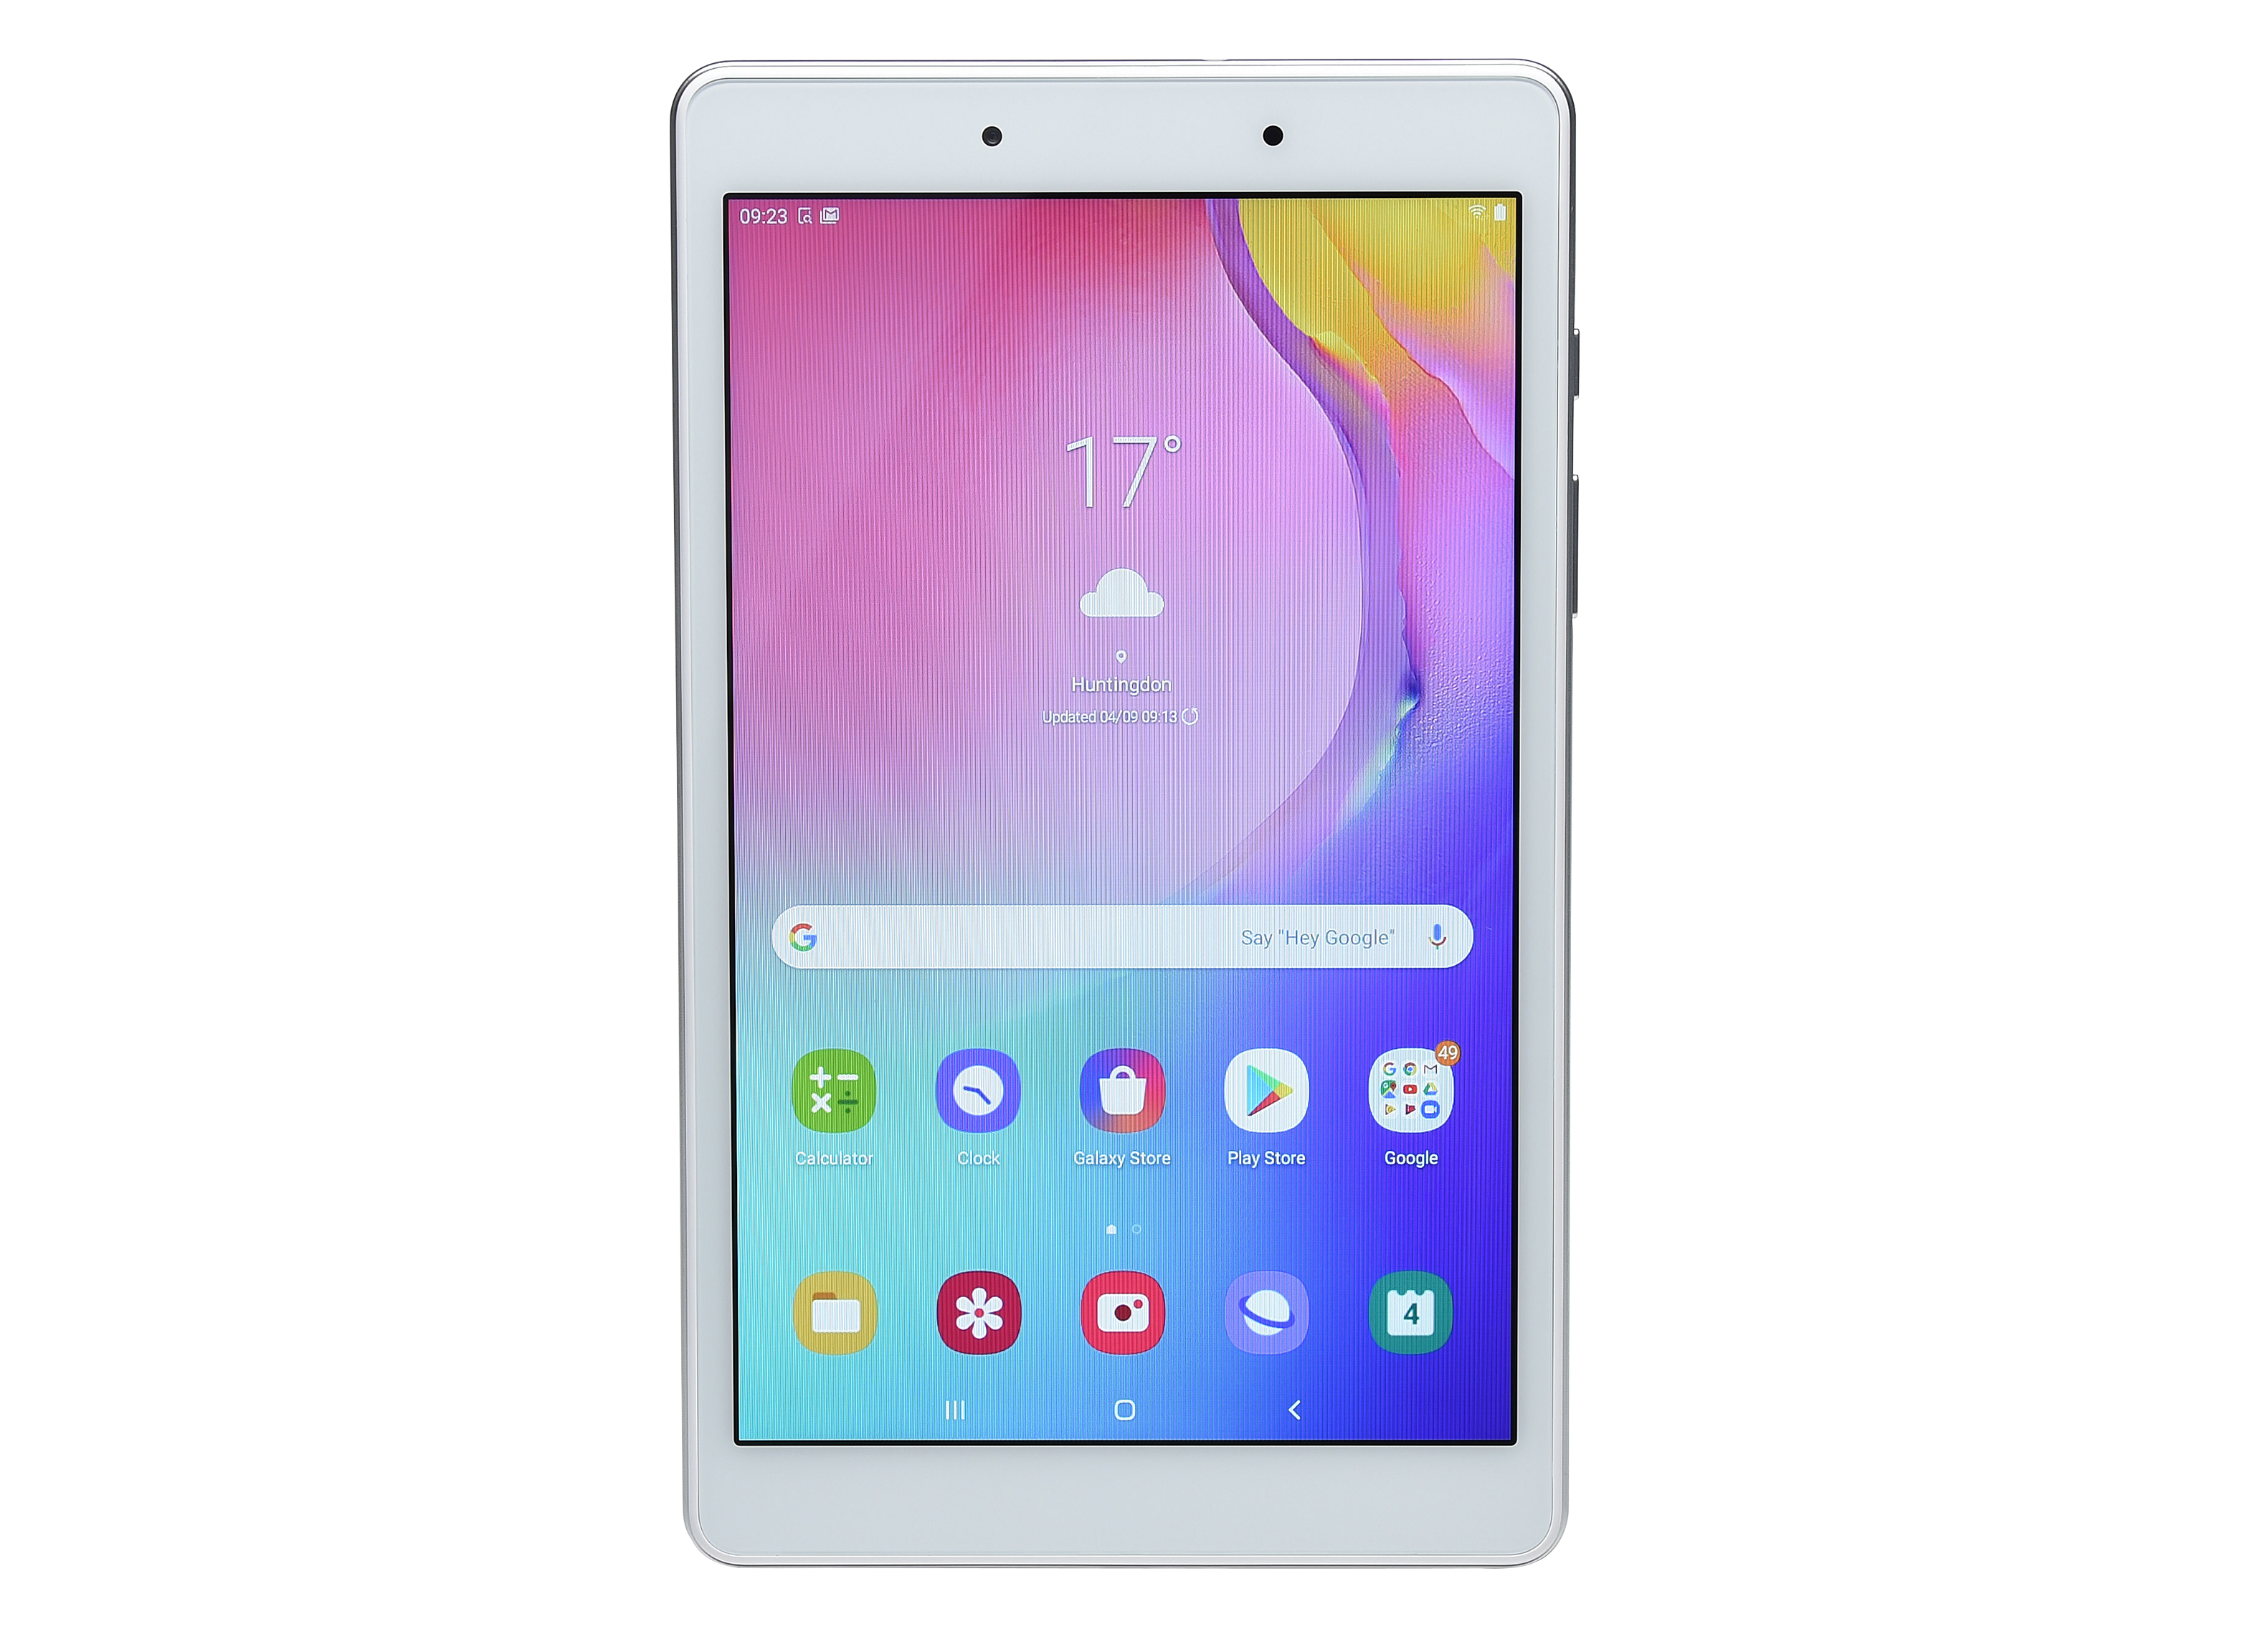 samsung tablet white png